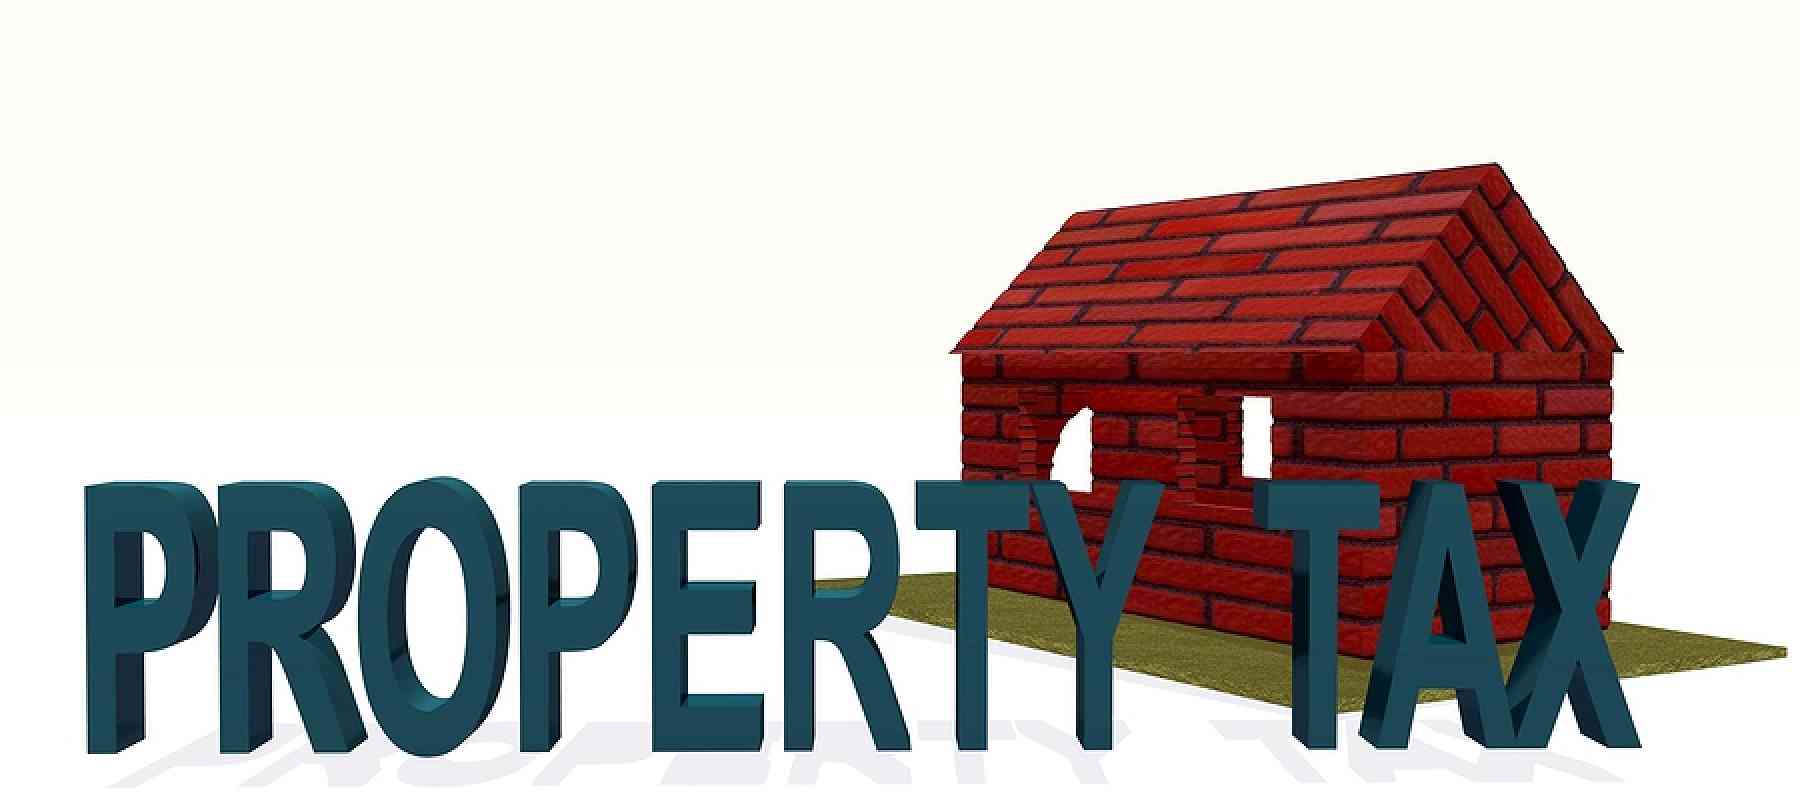 What You Need To Know About Property Taxes